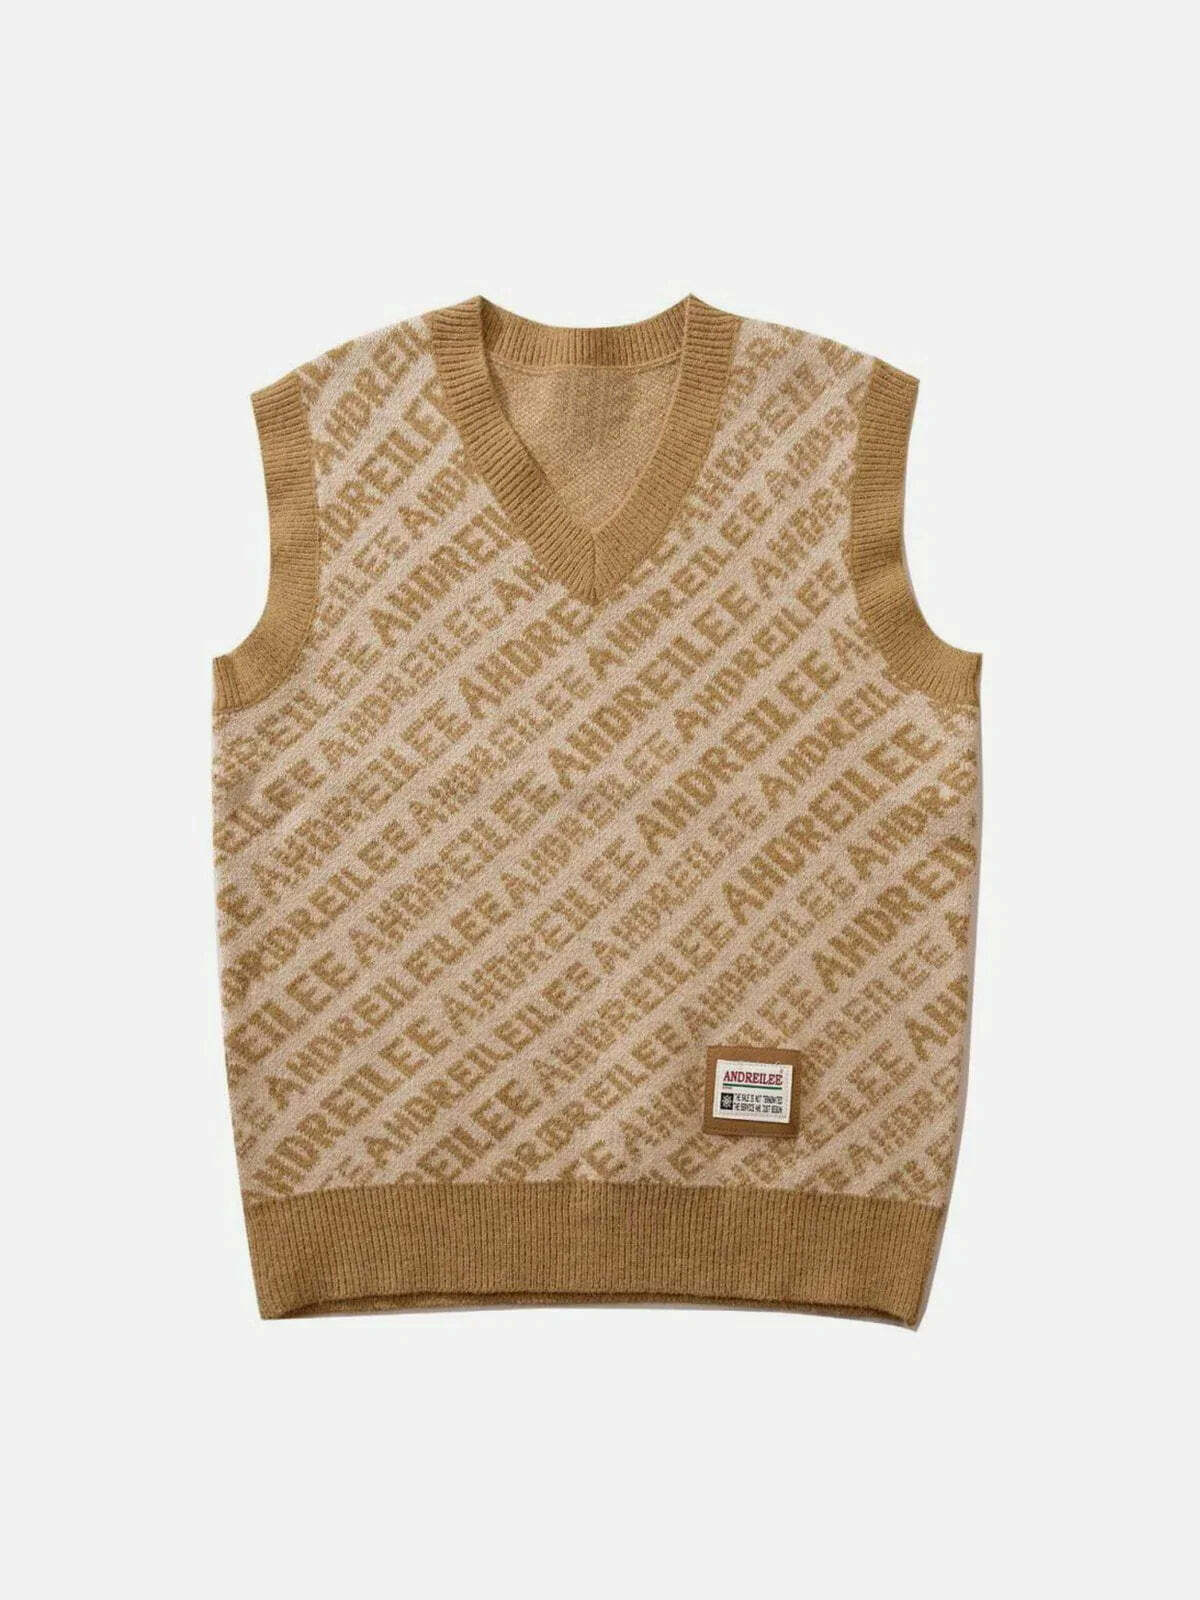 graphic letter print sweater vest edgy y2k streetwear 2419